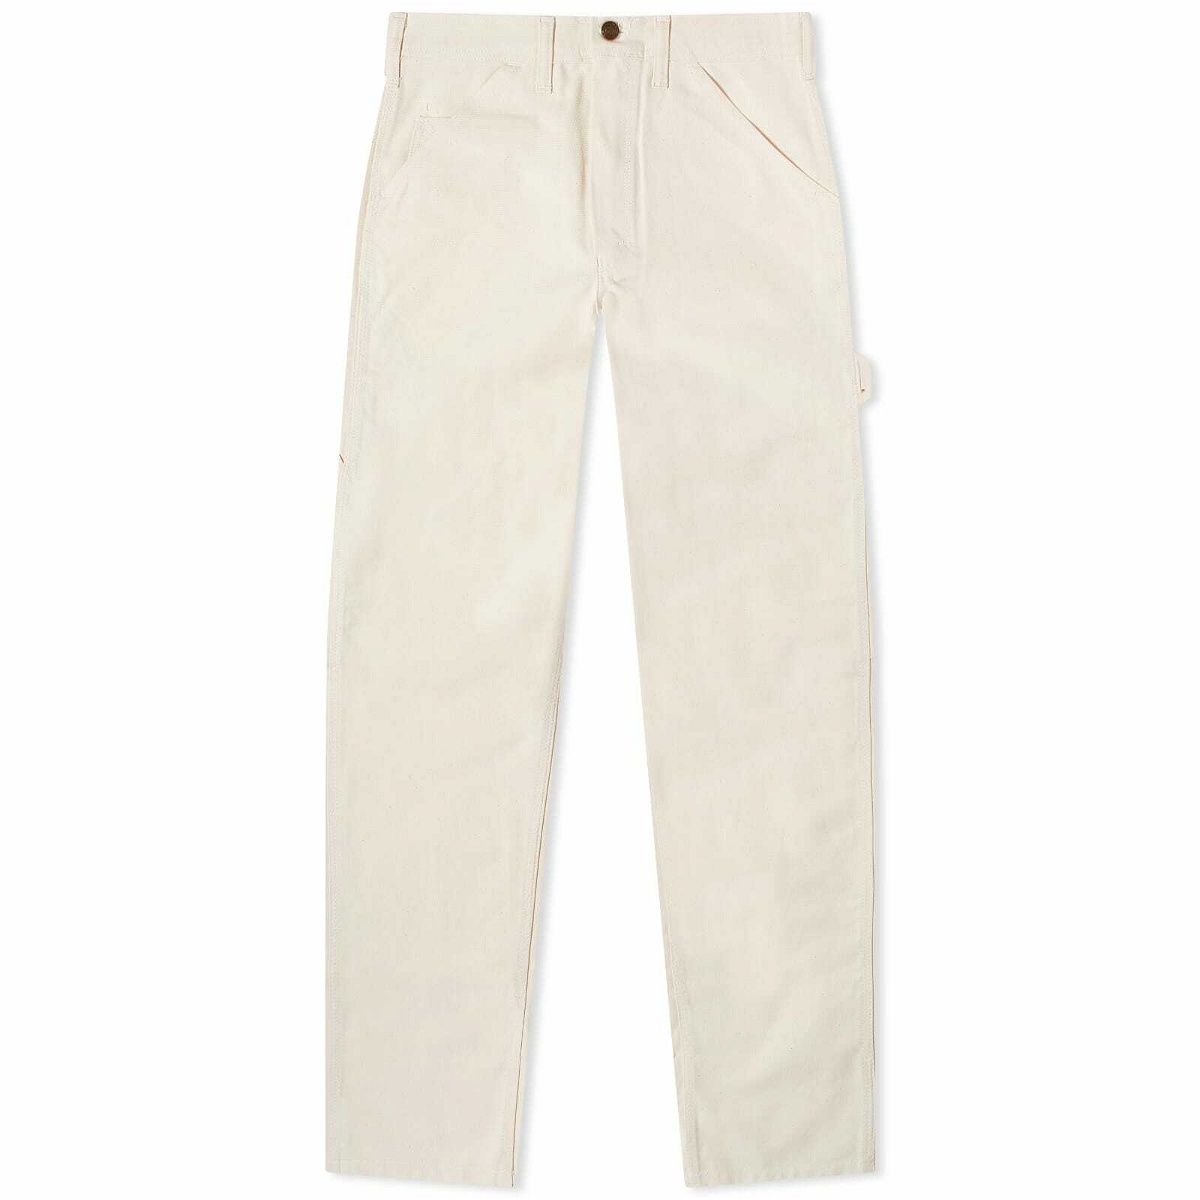 Stan Ray Men's OG Painter Pant in Natural Drill Stan Ray